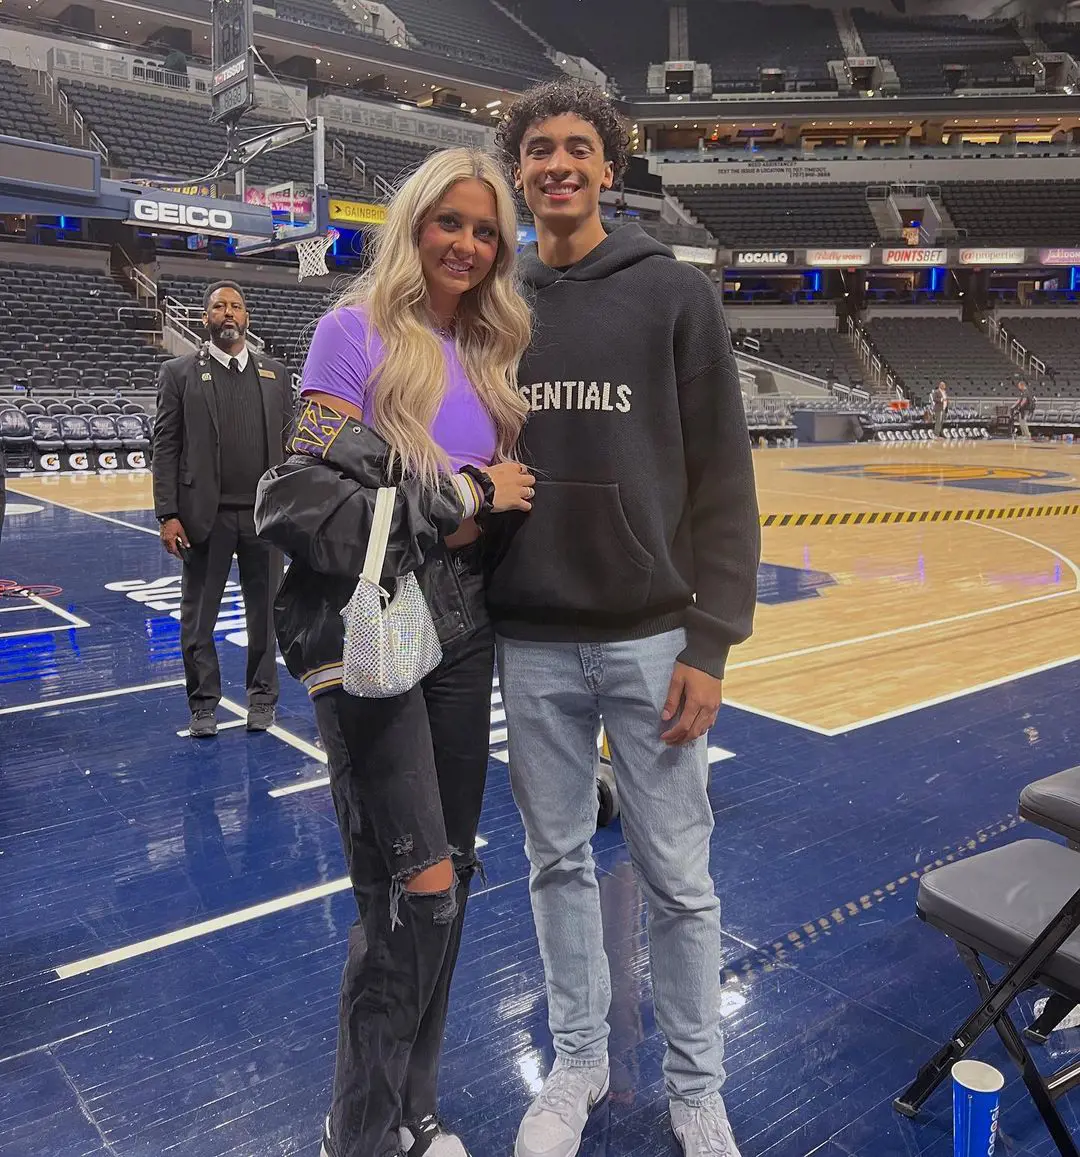 The couple enjoyed a thrilling NBA match between the Lakers and the Pacers